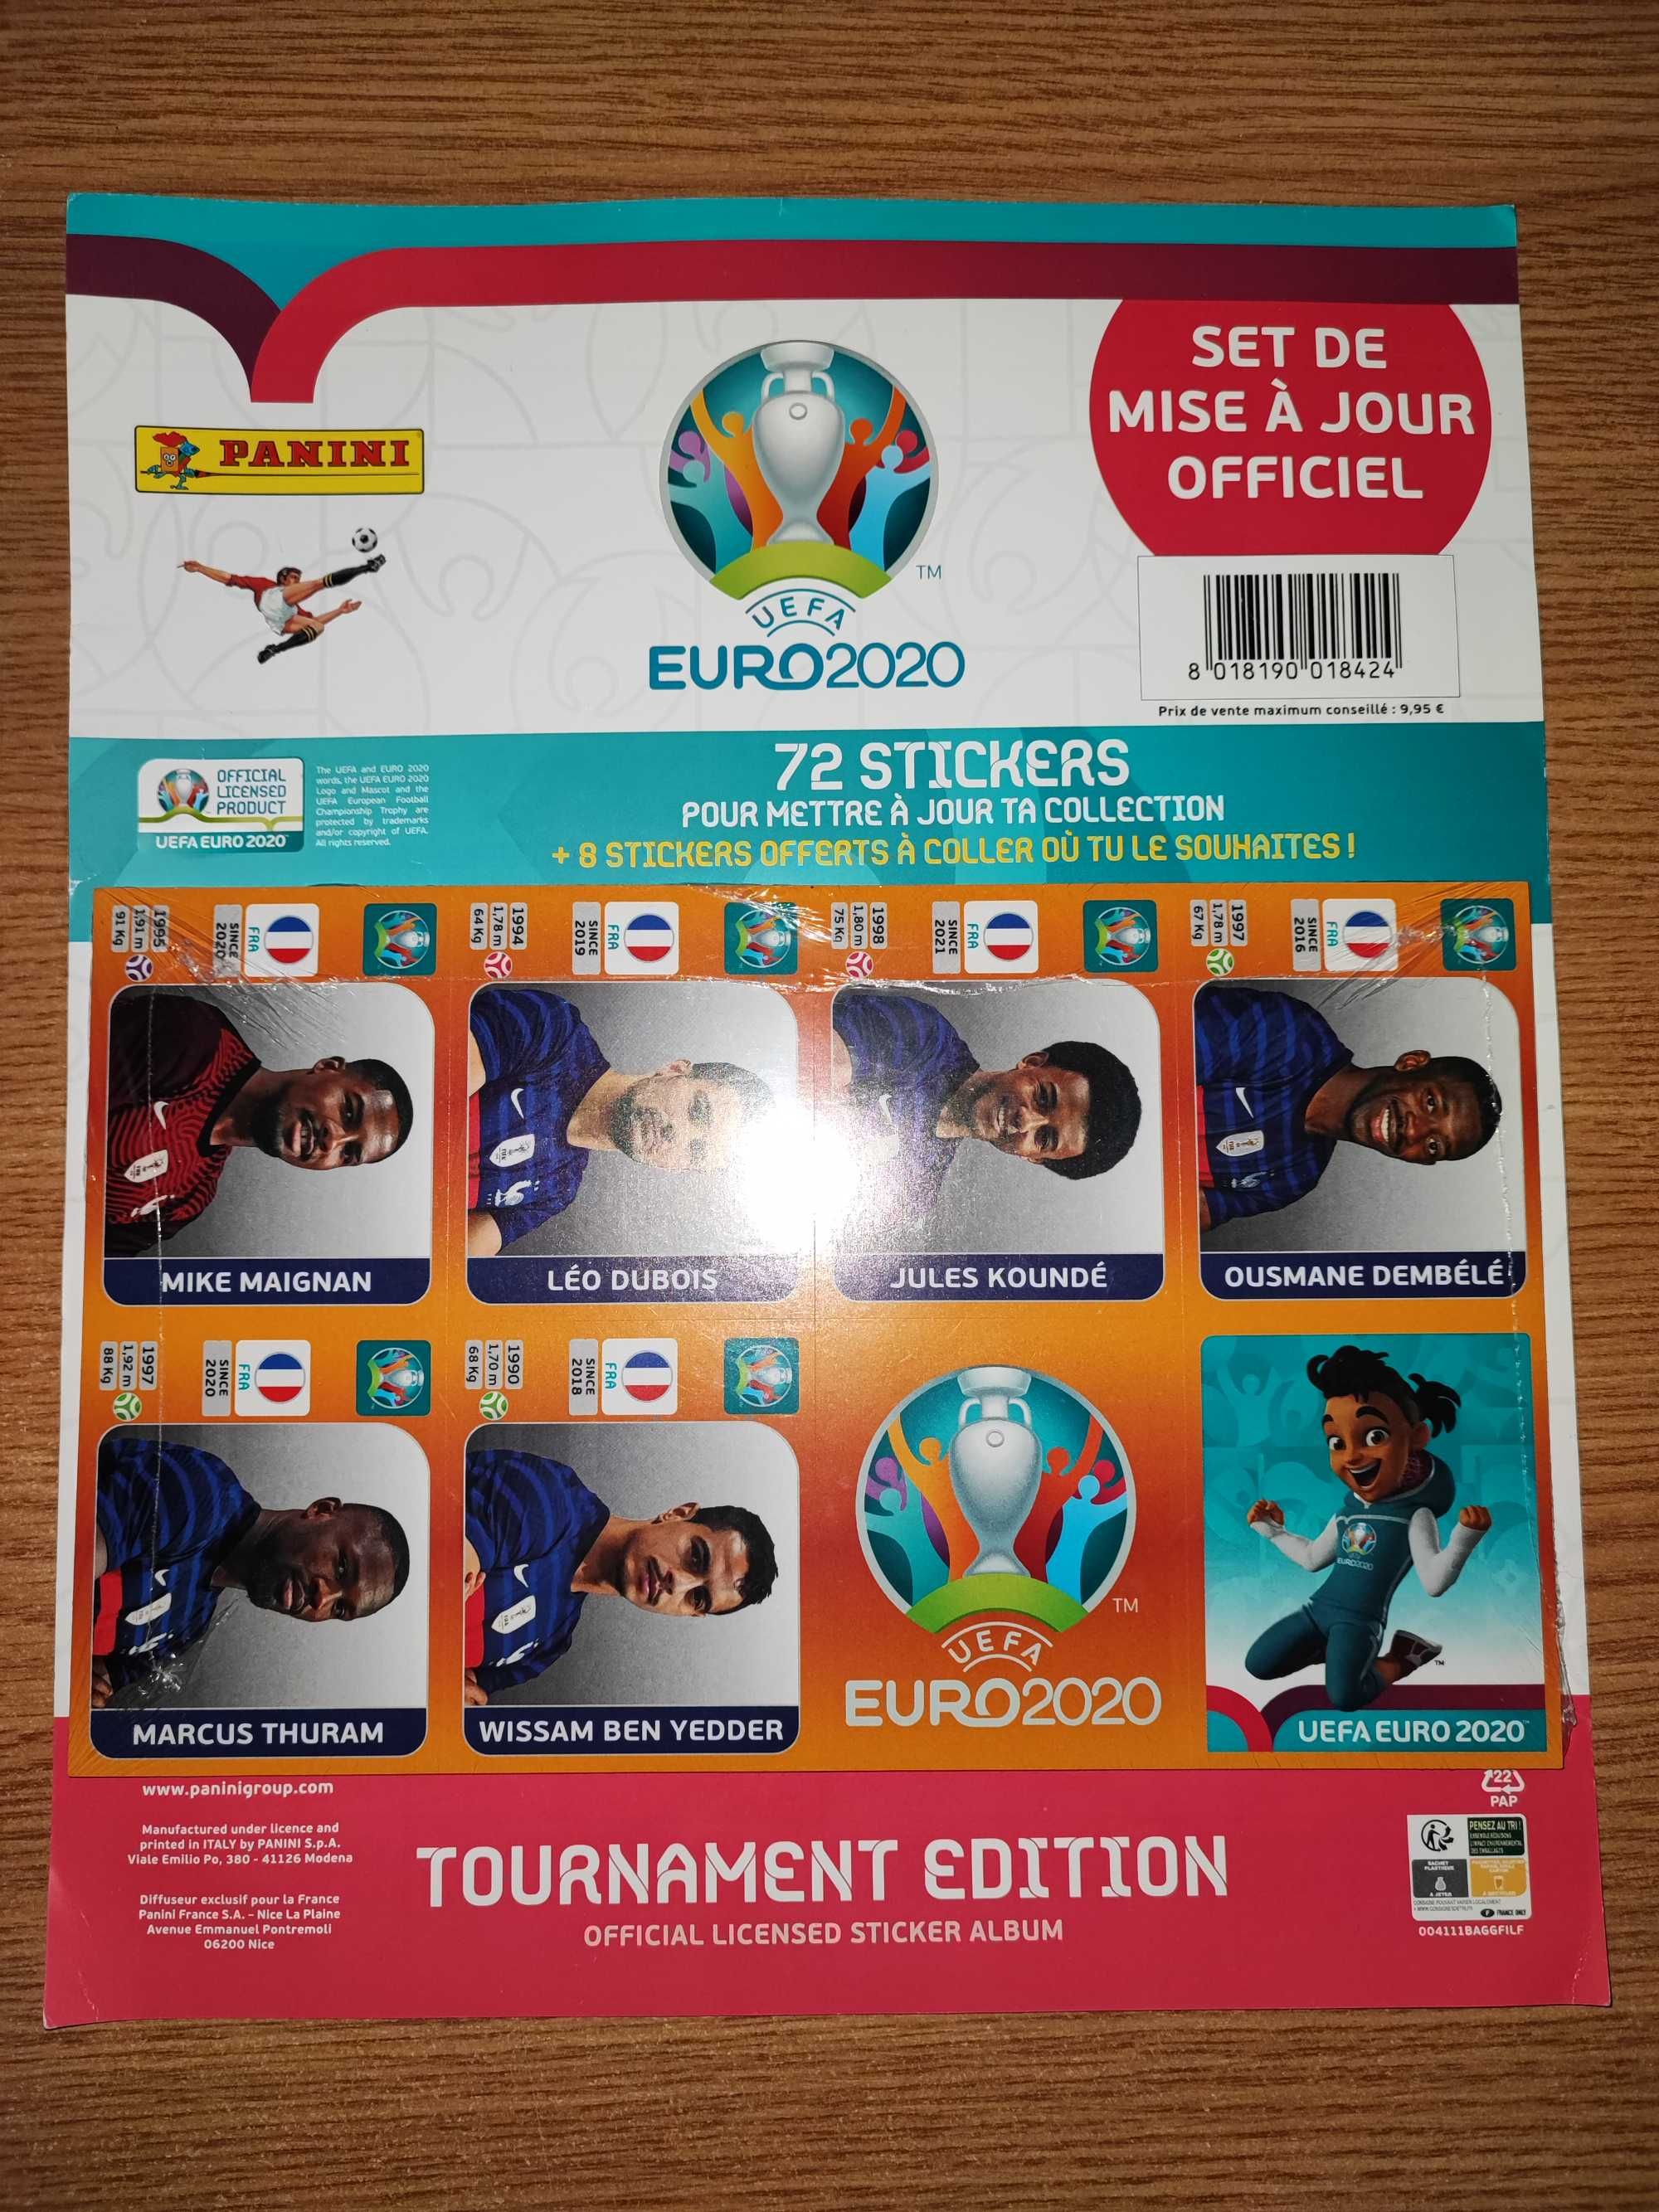 Set Panini Update Euro 2020 Tournement Edition Special Franța!